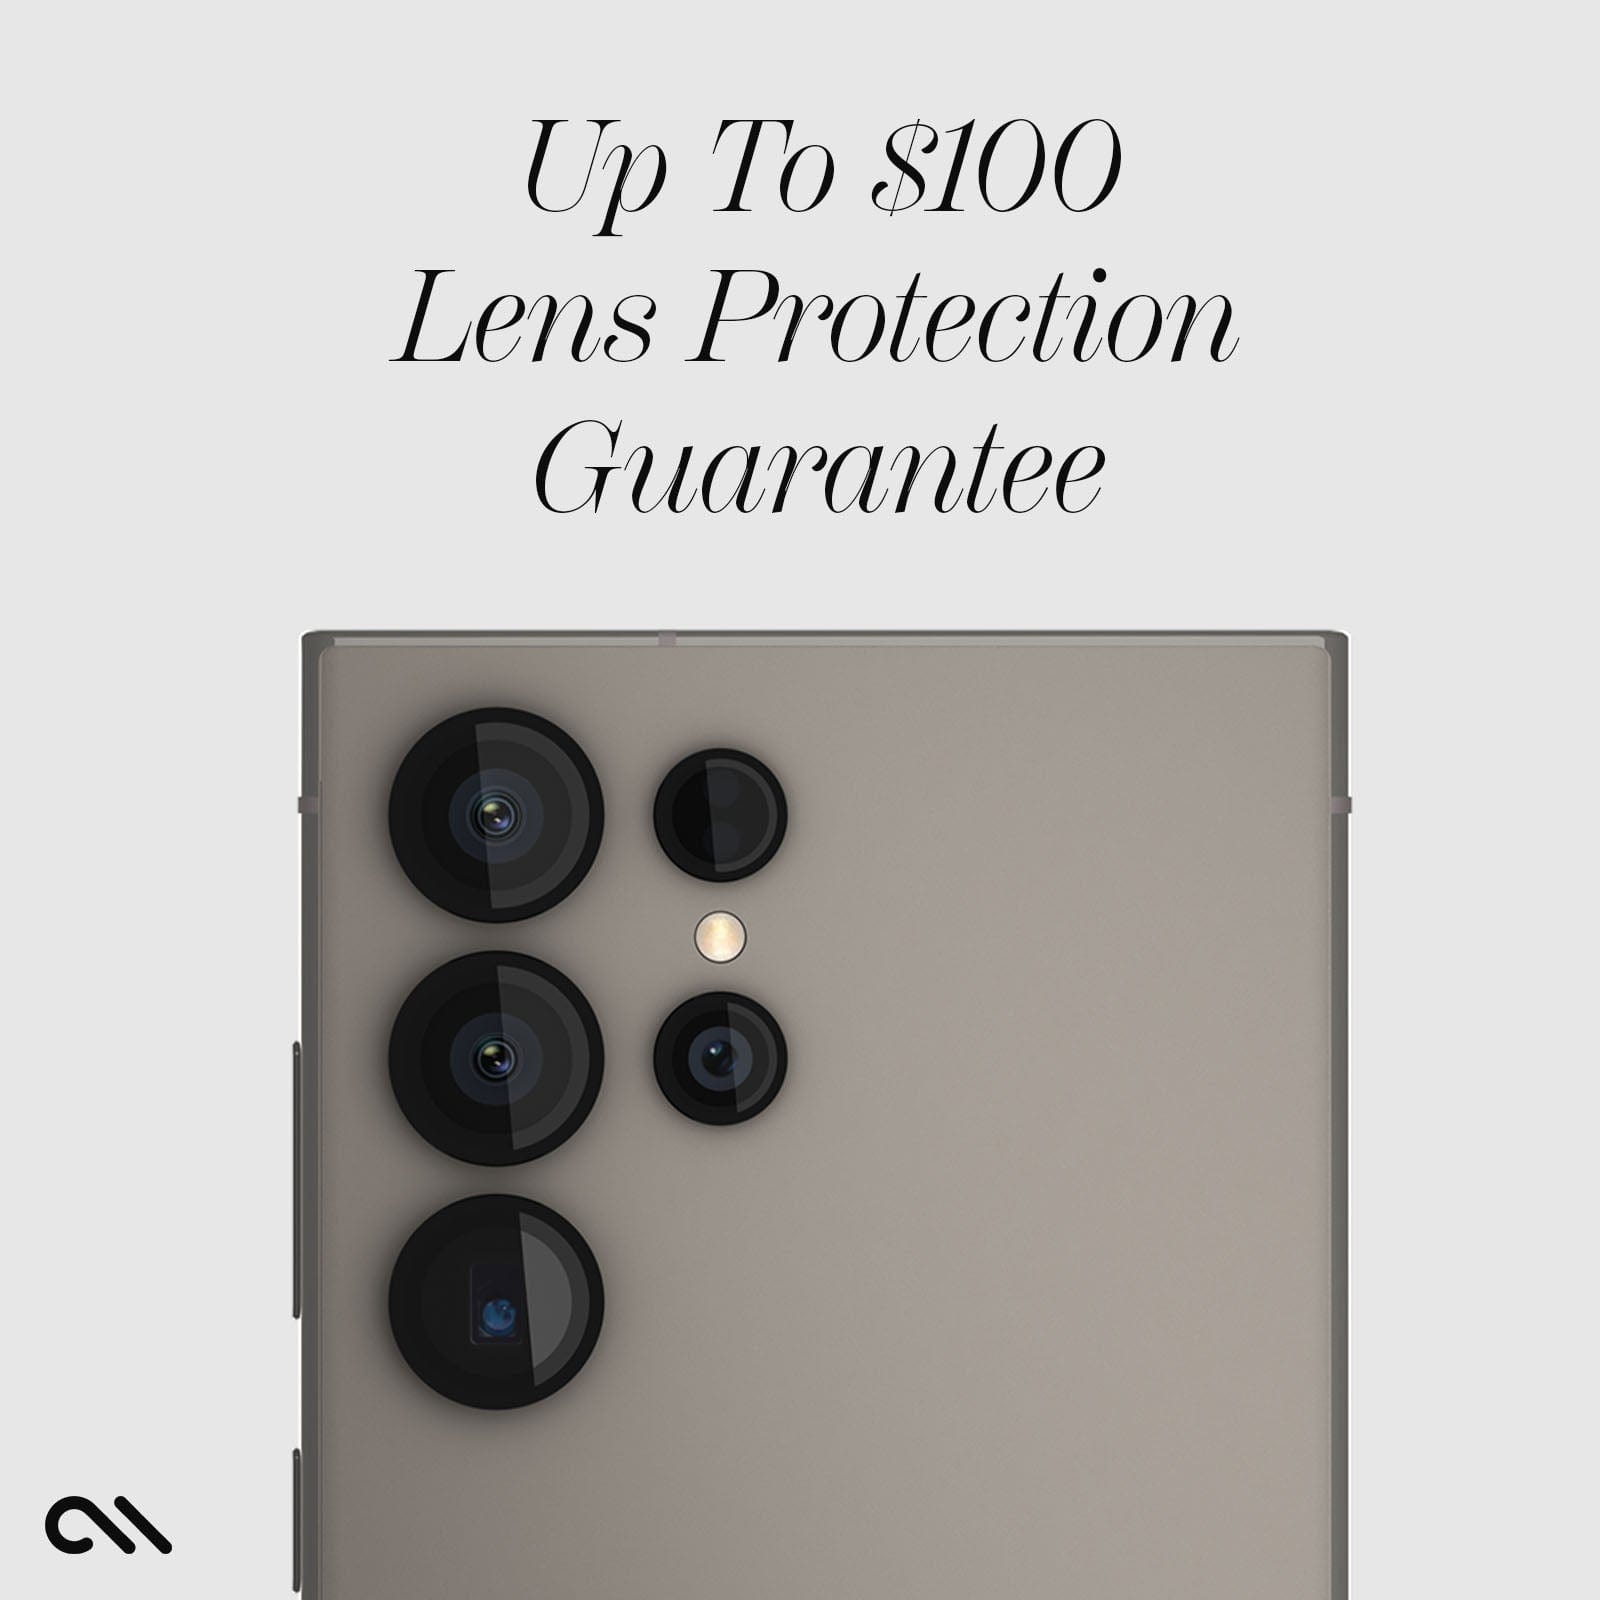 UP TO $100 LENS PROTECTION GUARANTEE